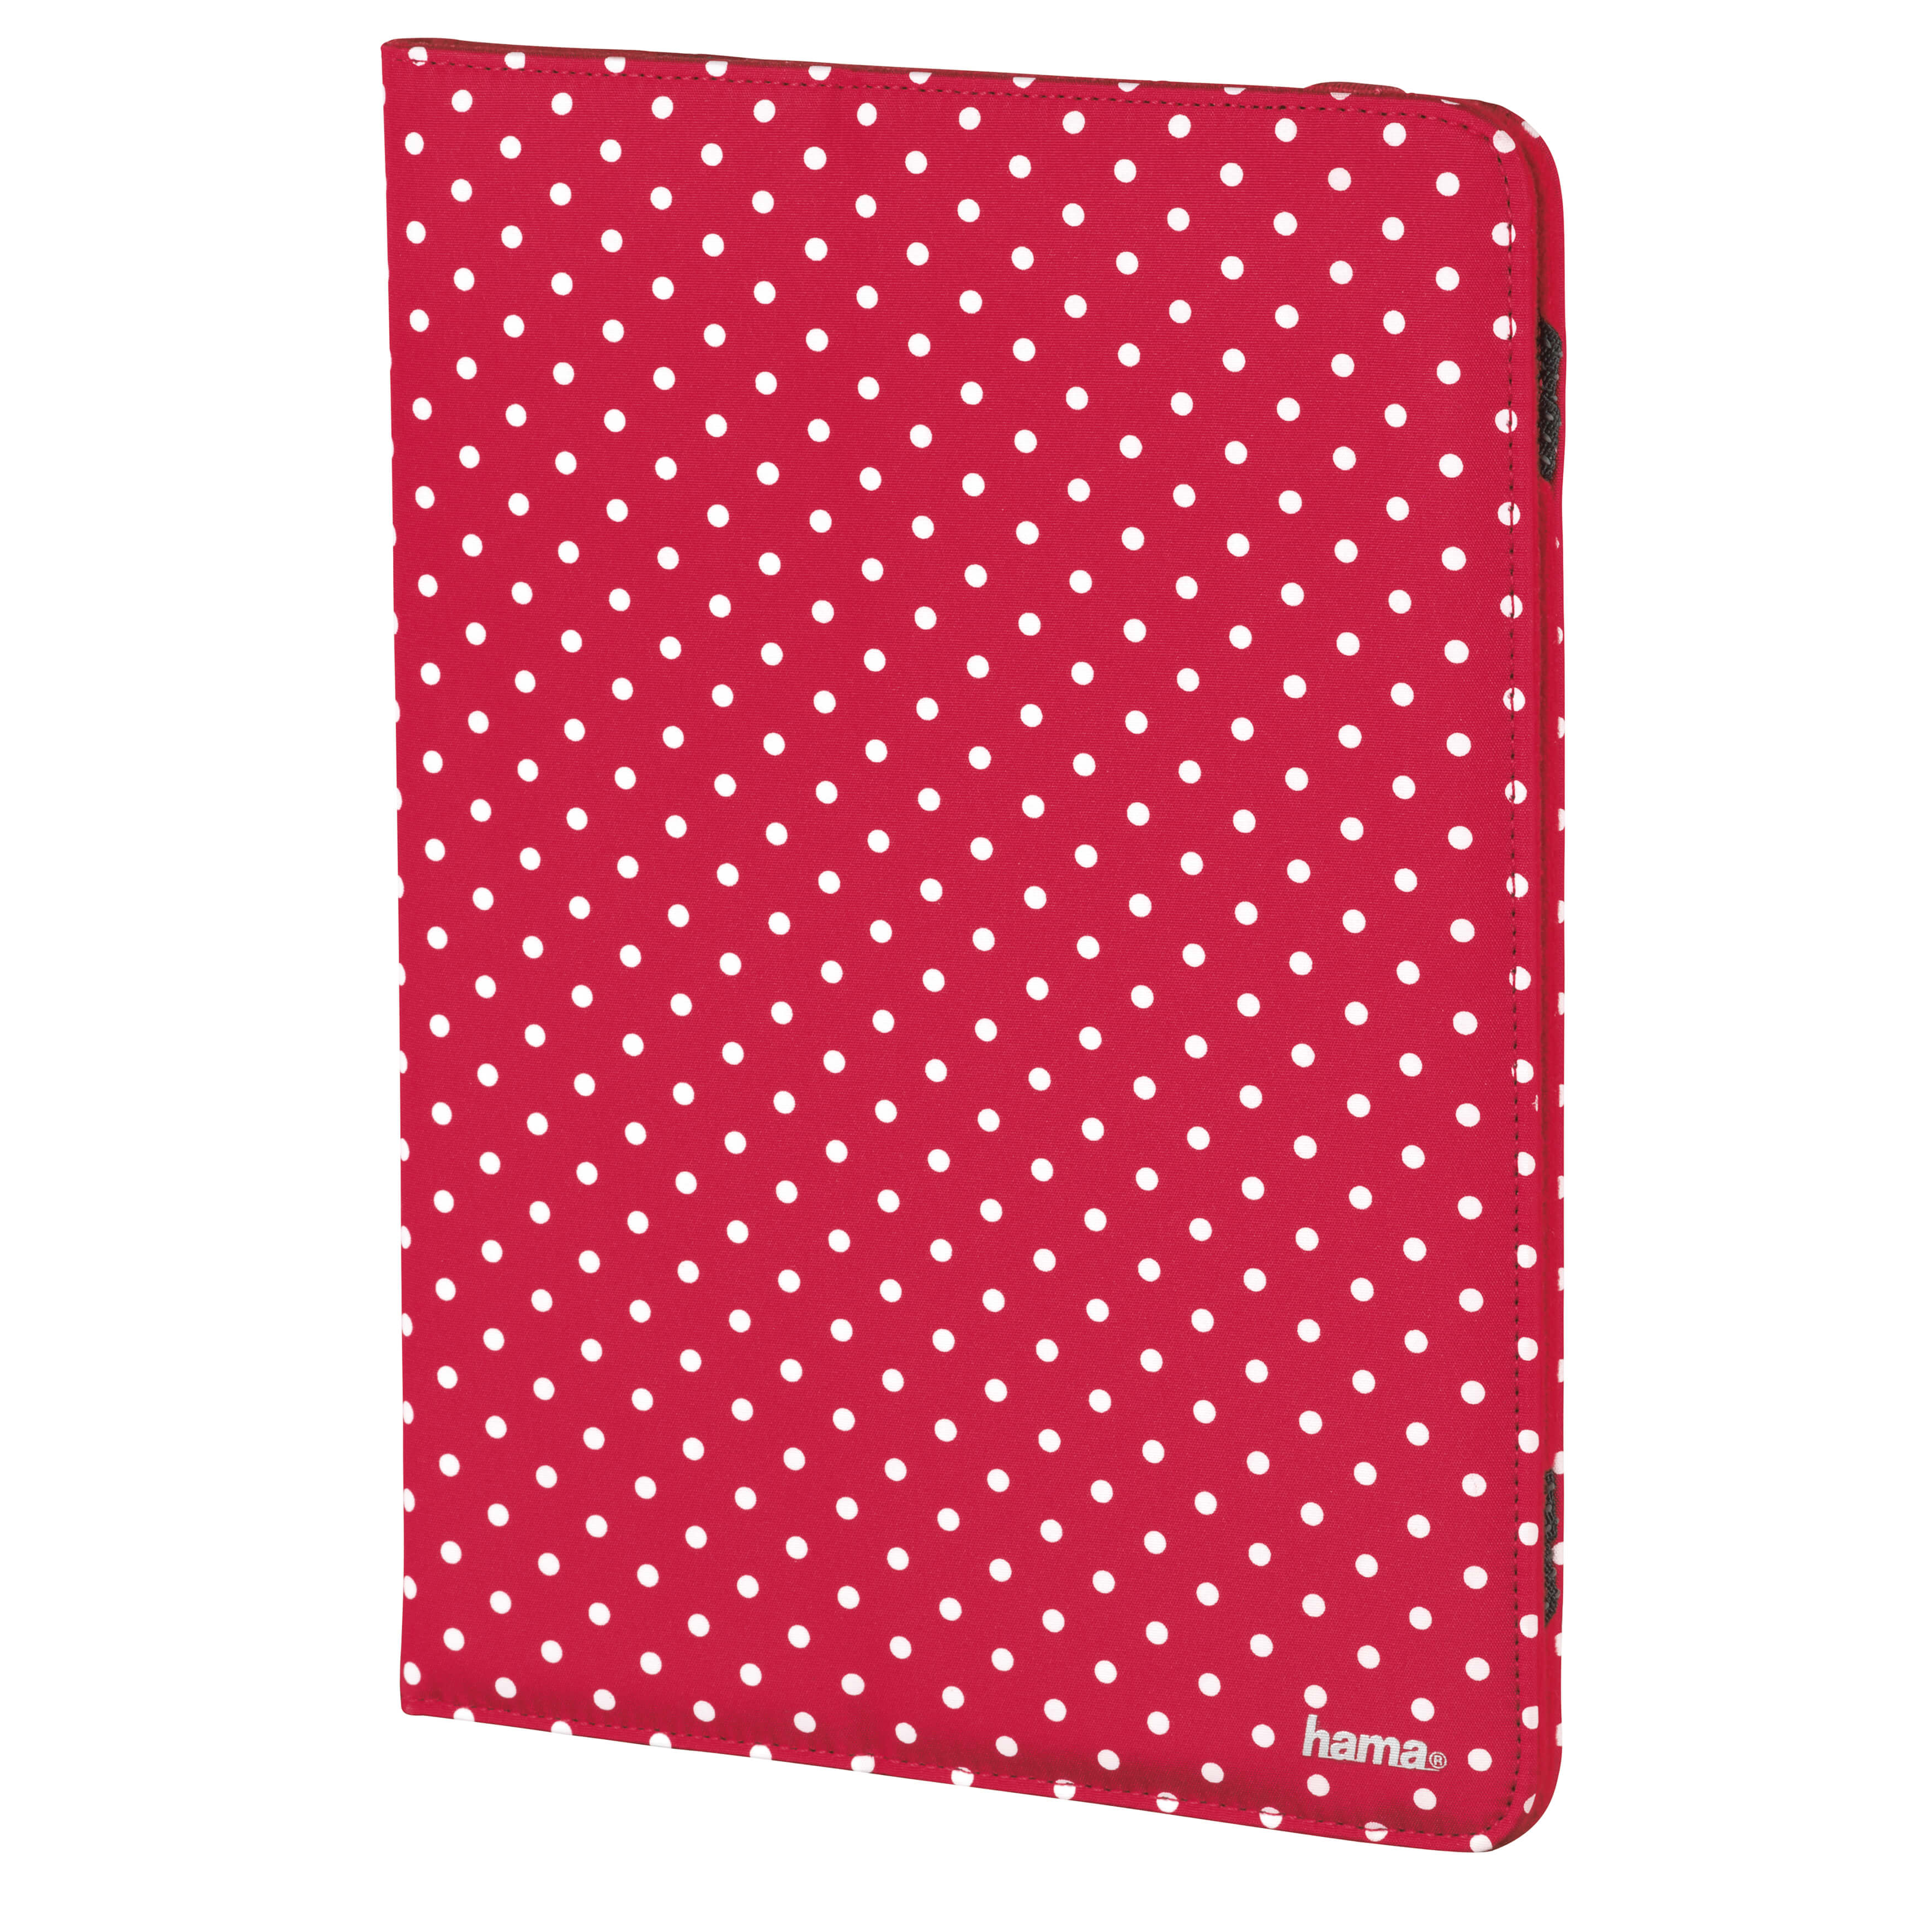 HAMA PolkaDot Tablet cover 10,1 red